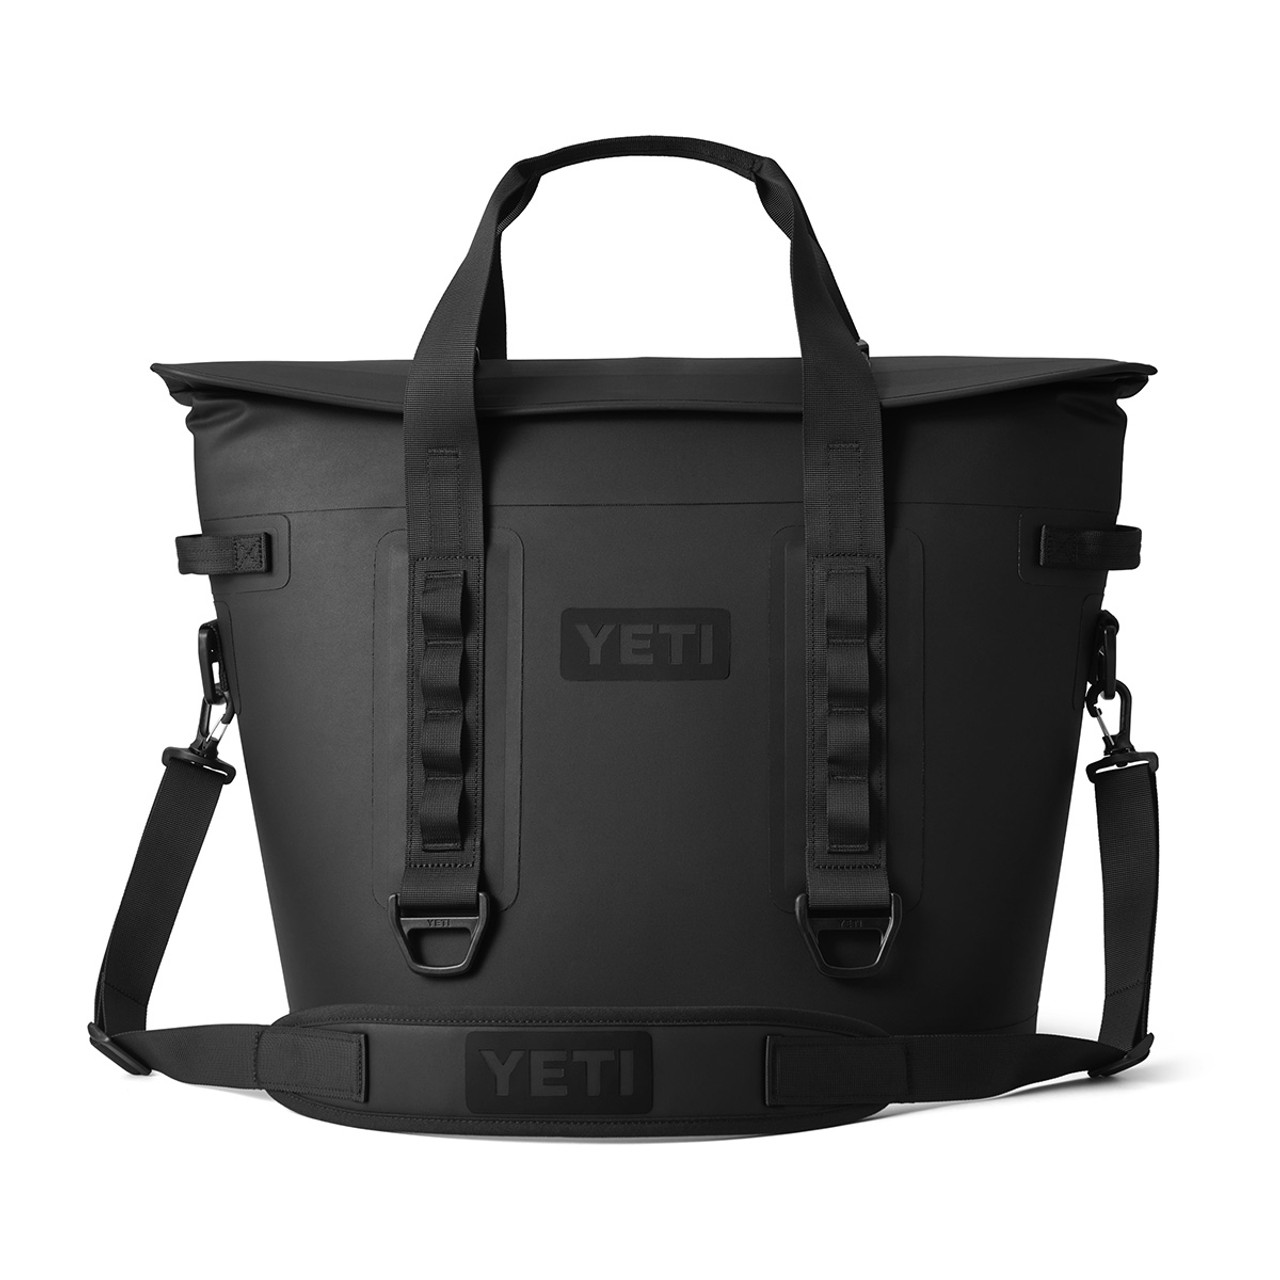 YETI intros the Hopper M30, the latest evolution of its genre-defining soft  cooler